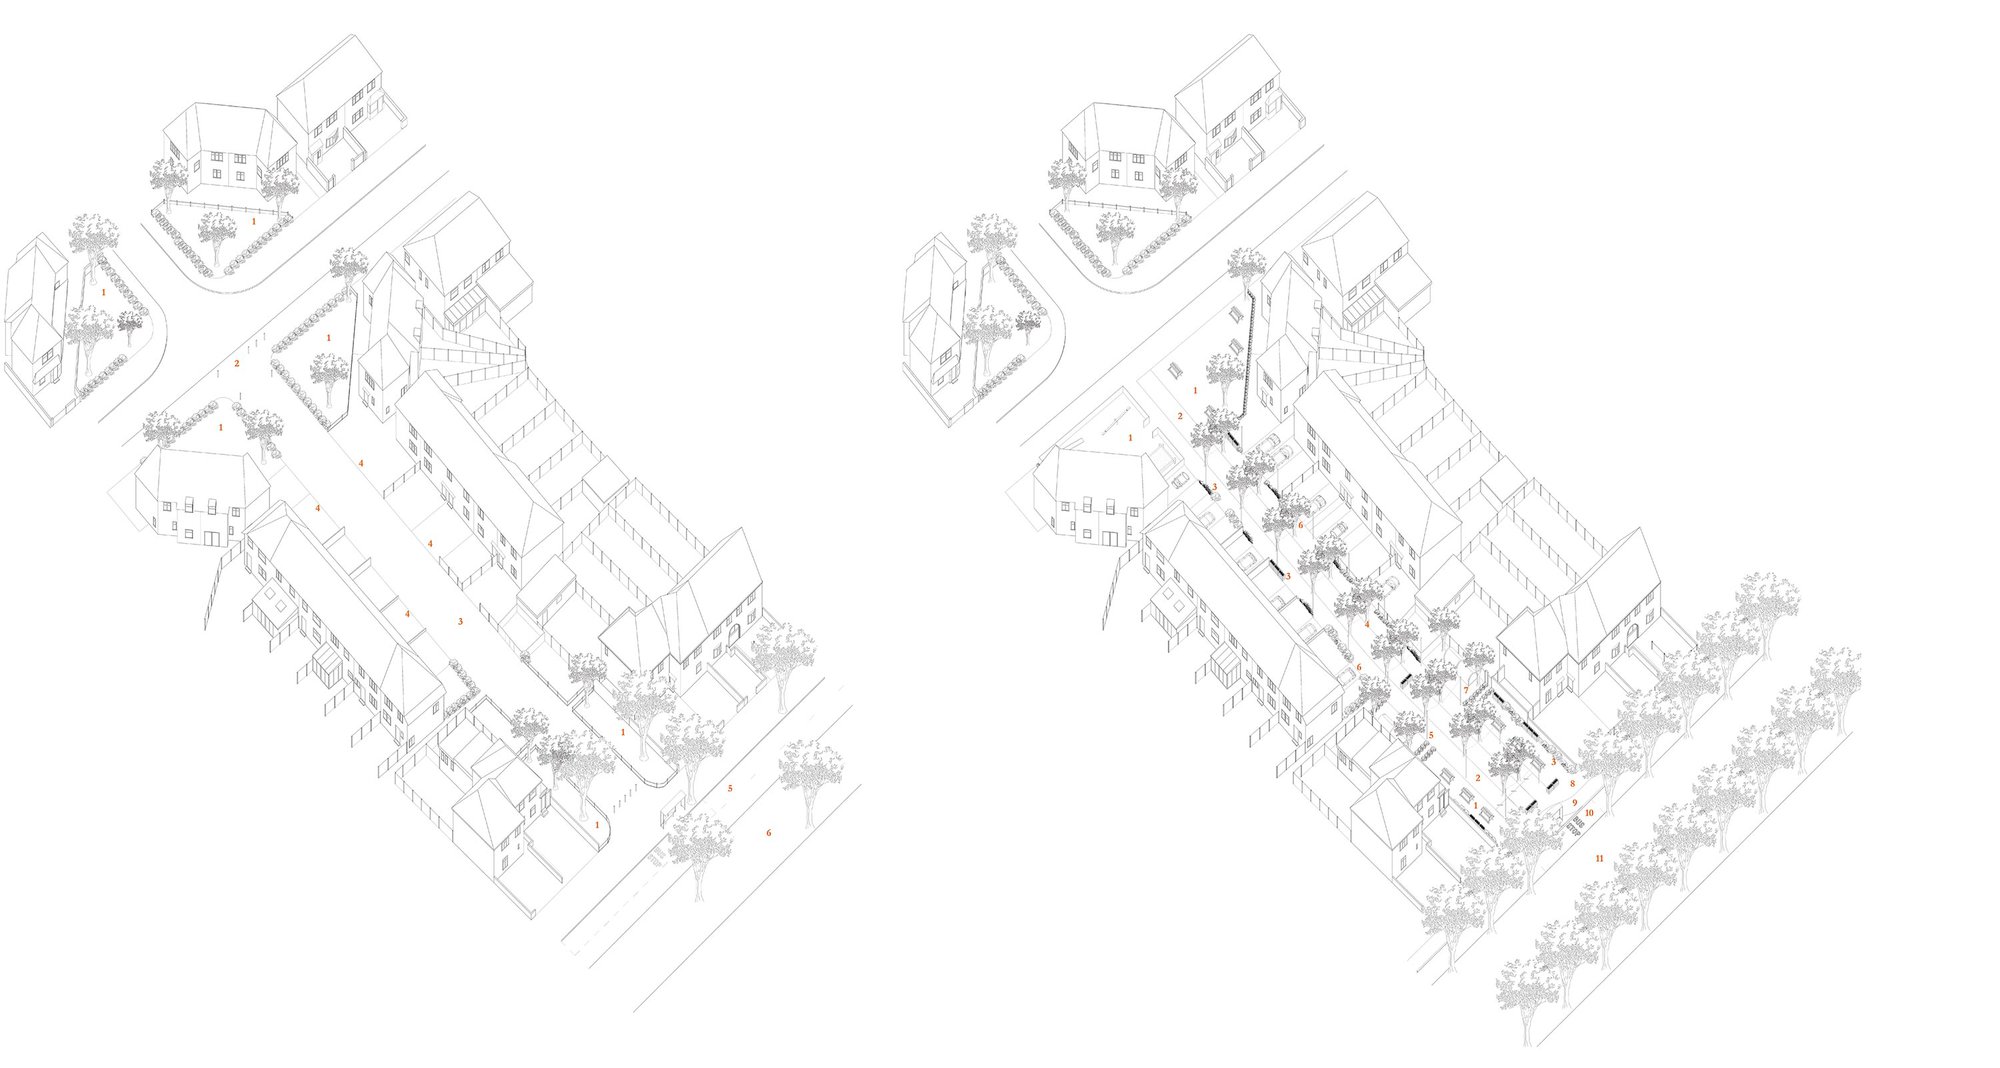 Zimmie Sutcliffe_Becontree Centenary Festival & Urban Room_Valence Avenue landscaping proposal.jpg